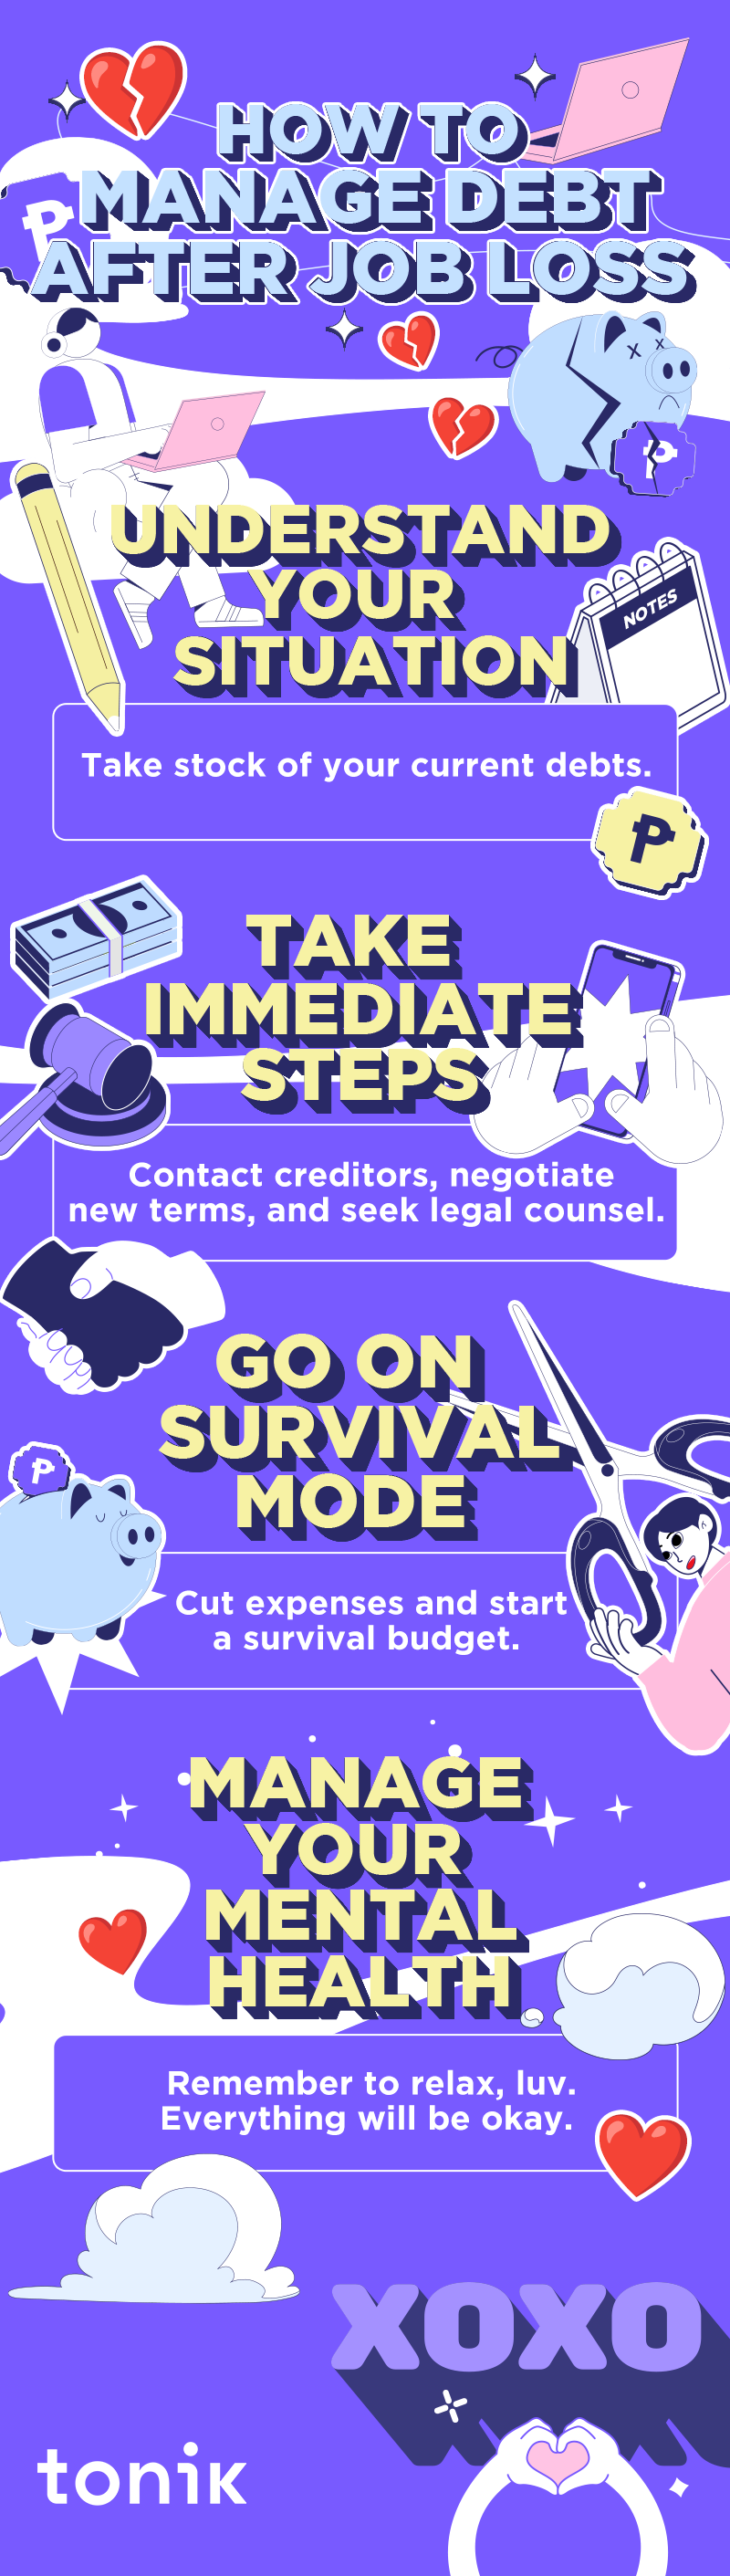 infographic on how to manage debt after job loss